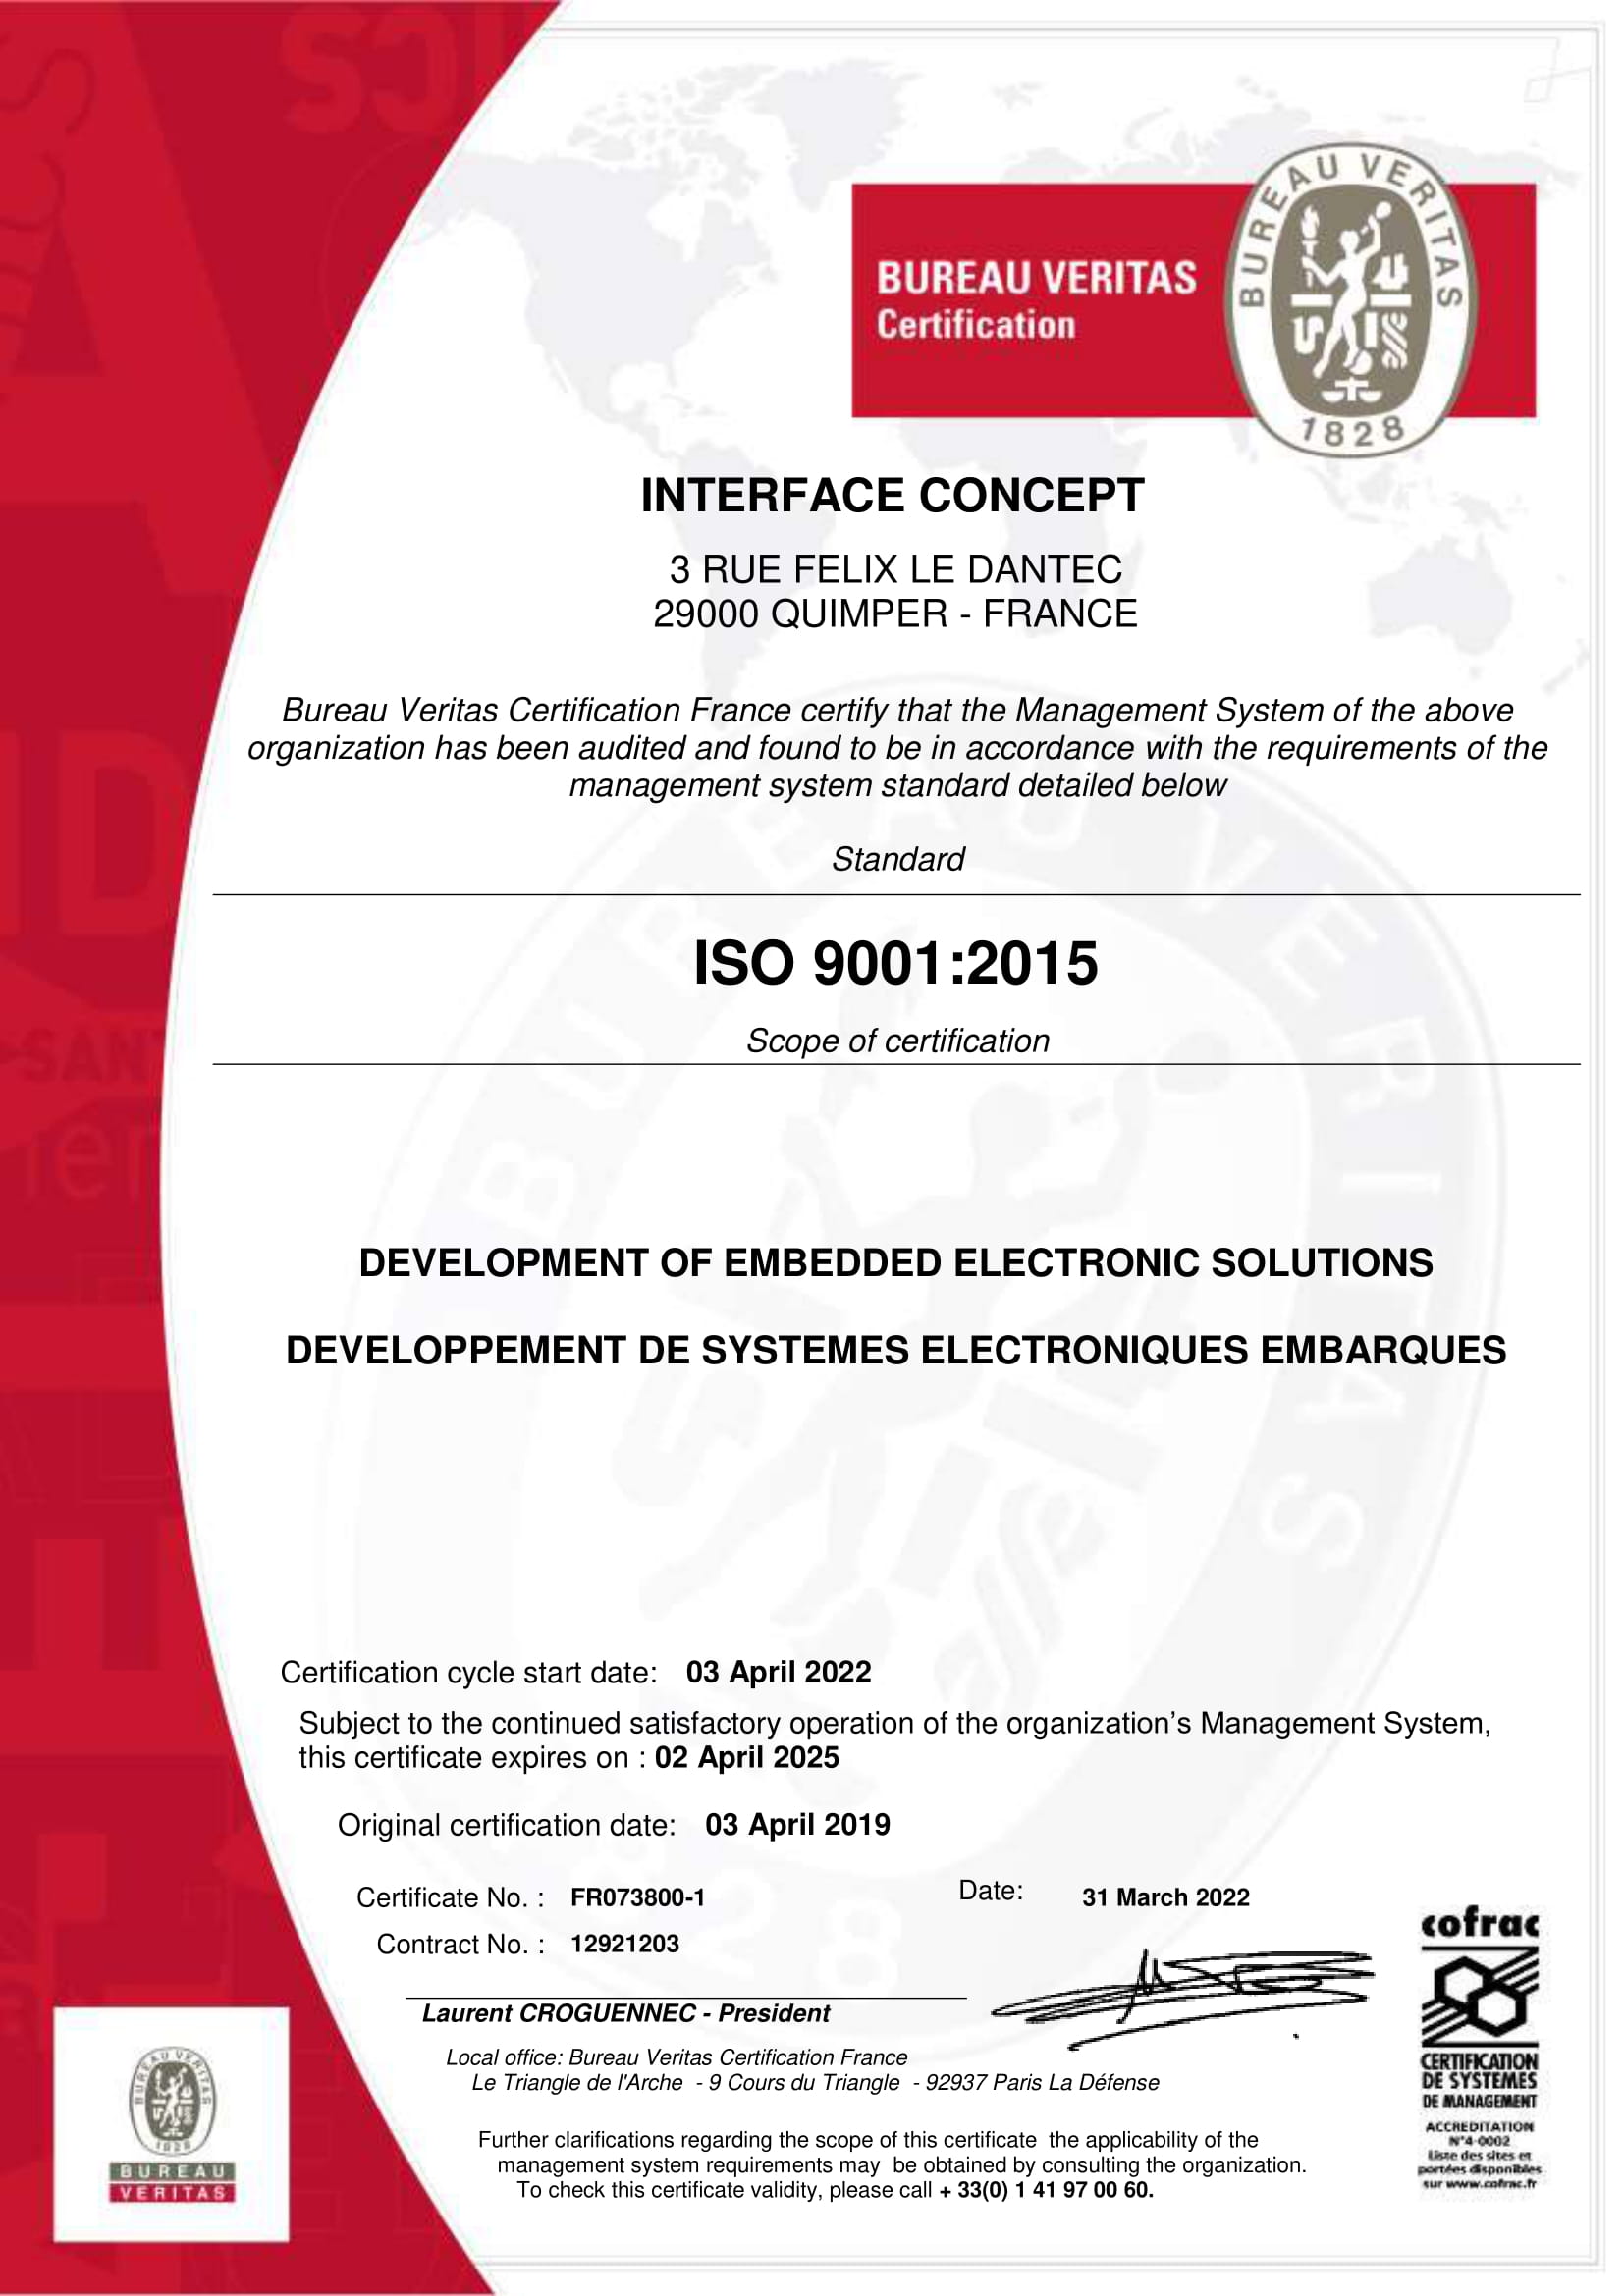 the certificate image